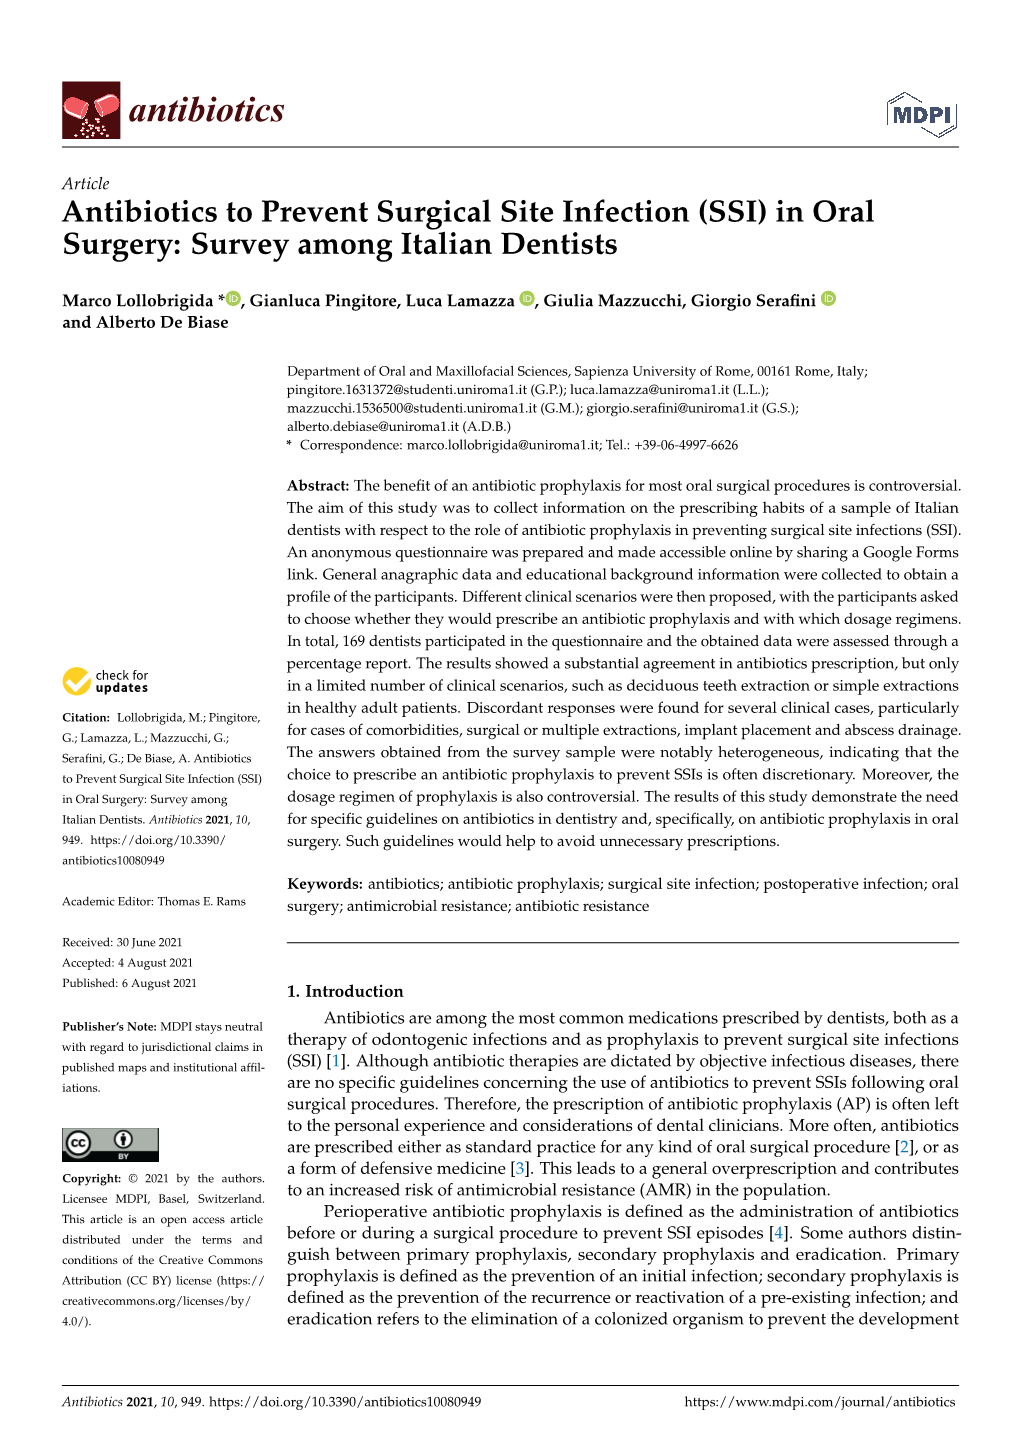 Antibiotics to Prevent Surgical Site Infection (SSI) in Oral Surgery: Survey Among Italian Dentists